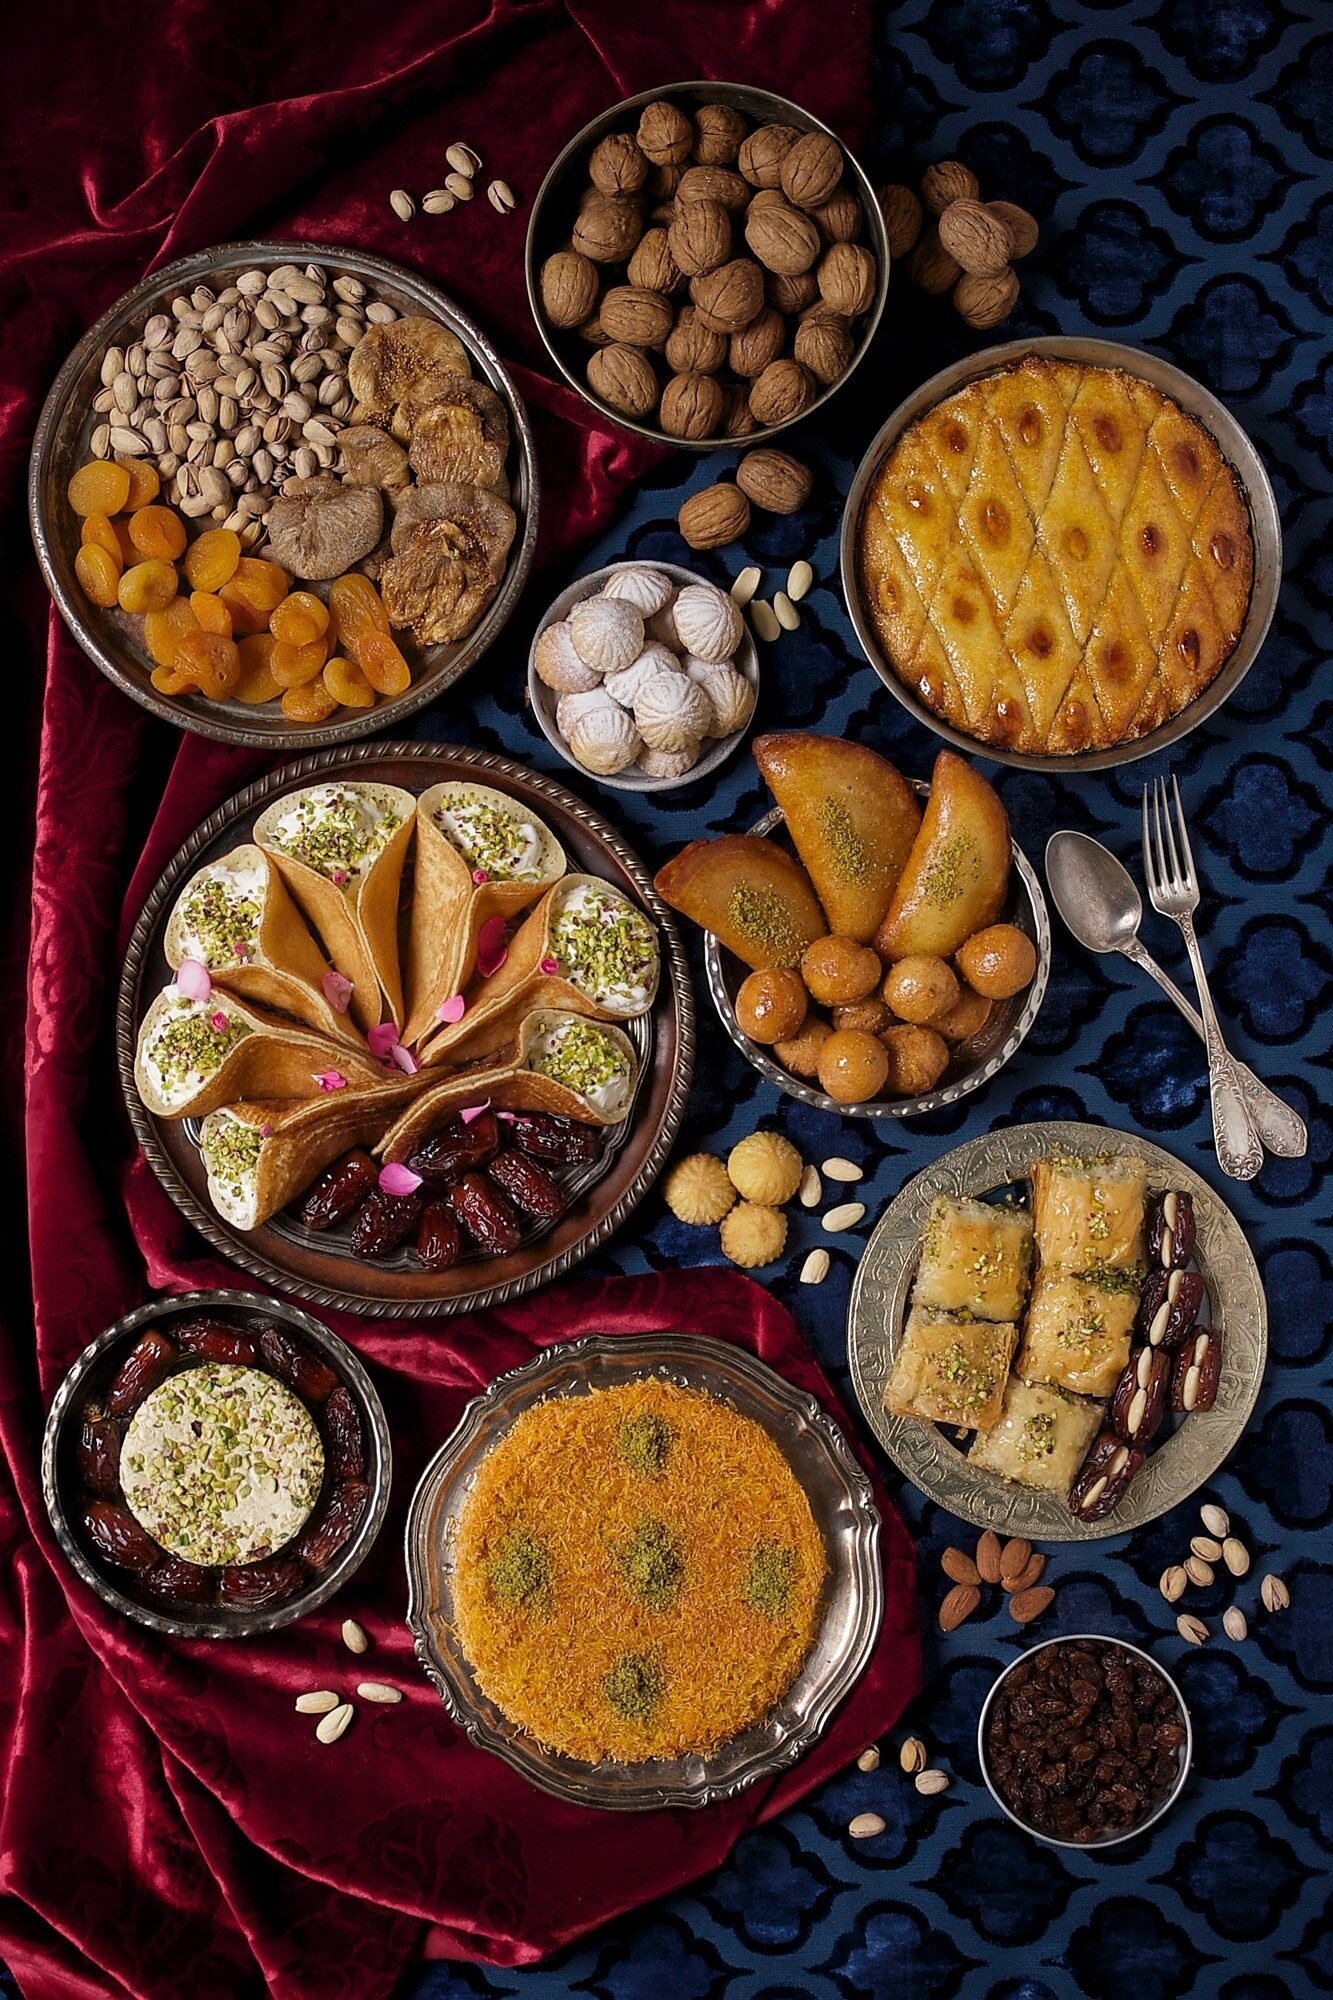 To celebrate the end of Ramadan in Palestine is used to eat dried fruits, dates, nuts, dried figs and to prepare many different desserts: Qatayef, Basbousa, Ma'amoul, Ka'k…<br />
@PopPalestineCusine - Cookbook "Pop Palestine. Salam Cuisine from Gaza to Jenin", printed in Italy, 2016.<br />
